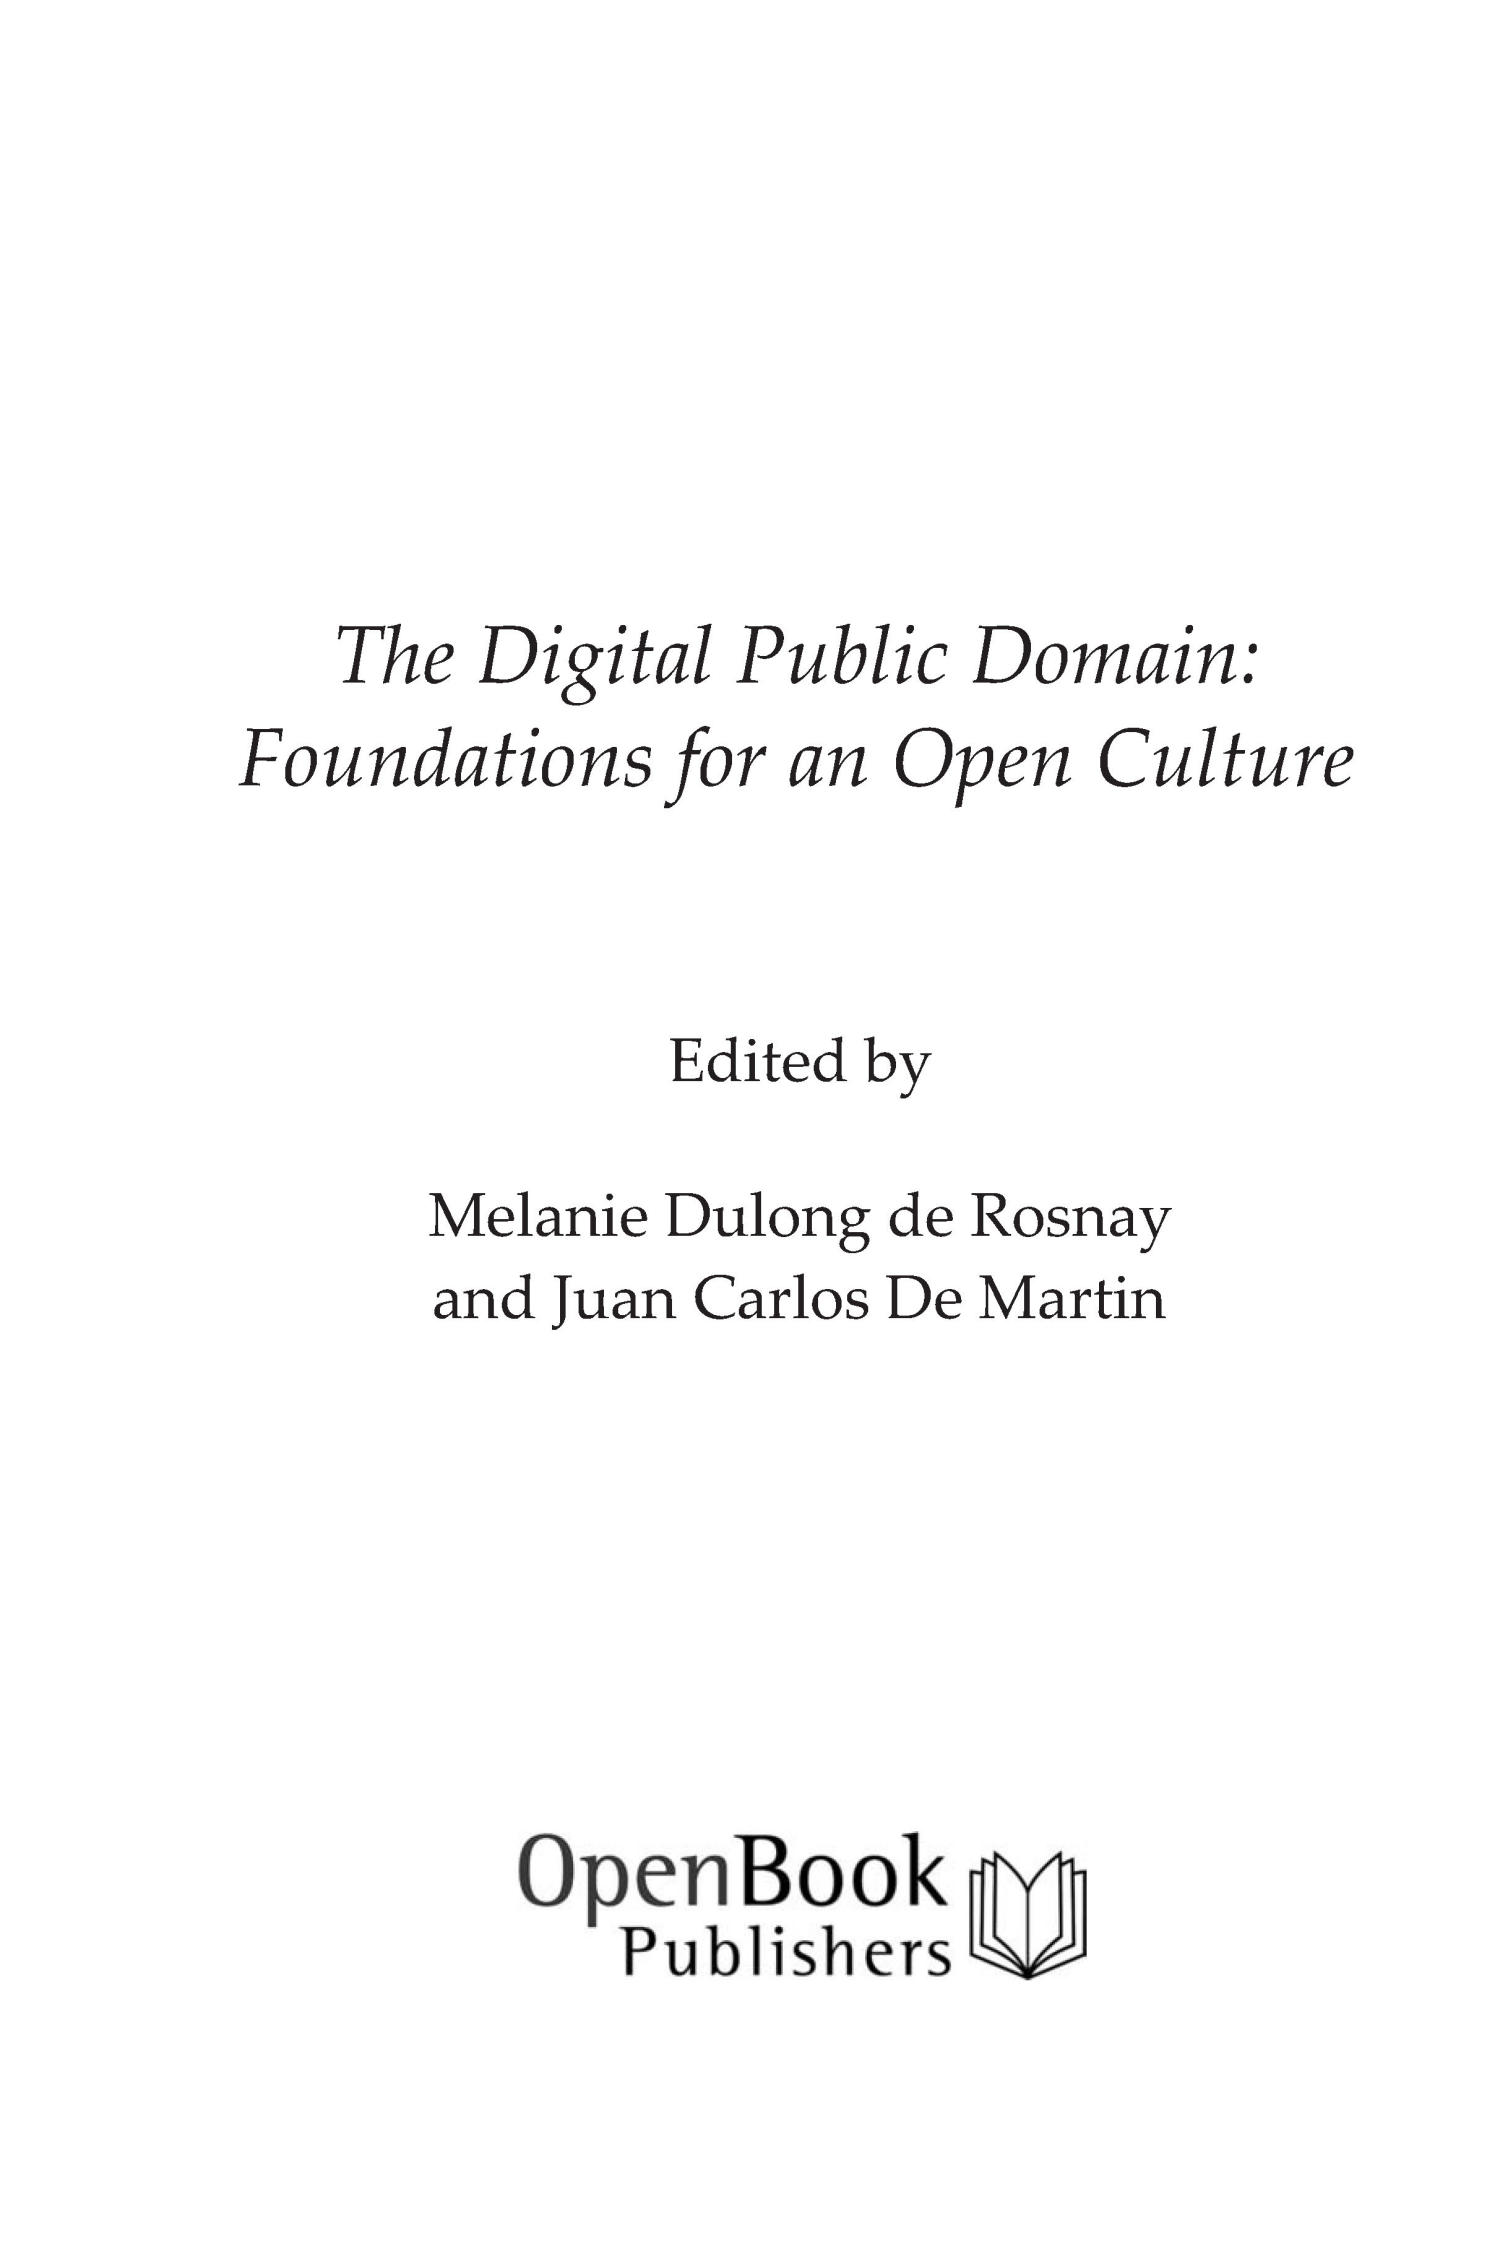 The Digital Public Domain: Foundations for an Open Culture
                                                
                                                    III
                                                